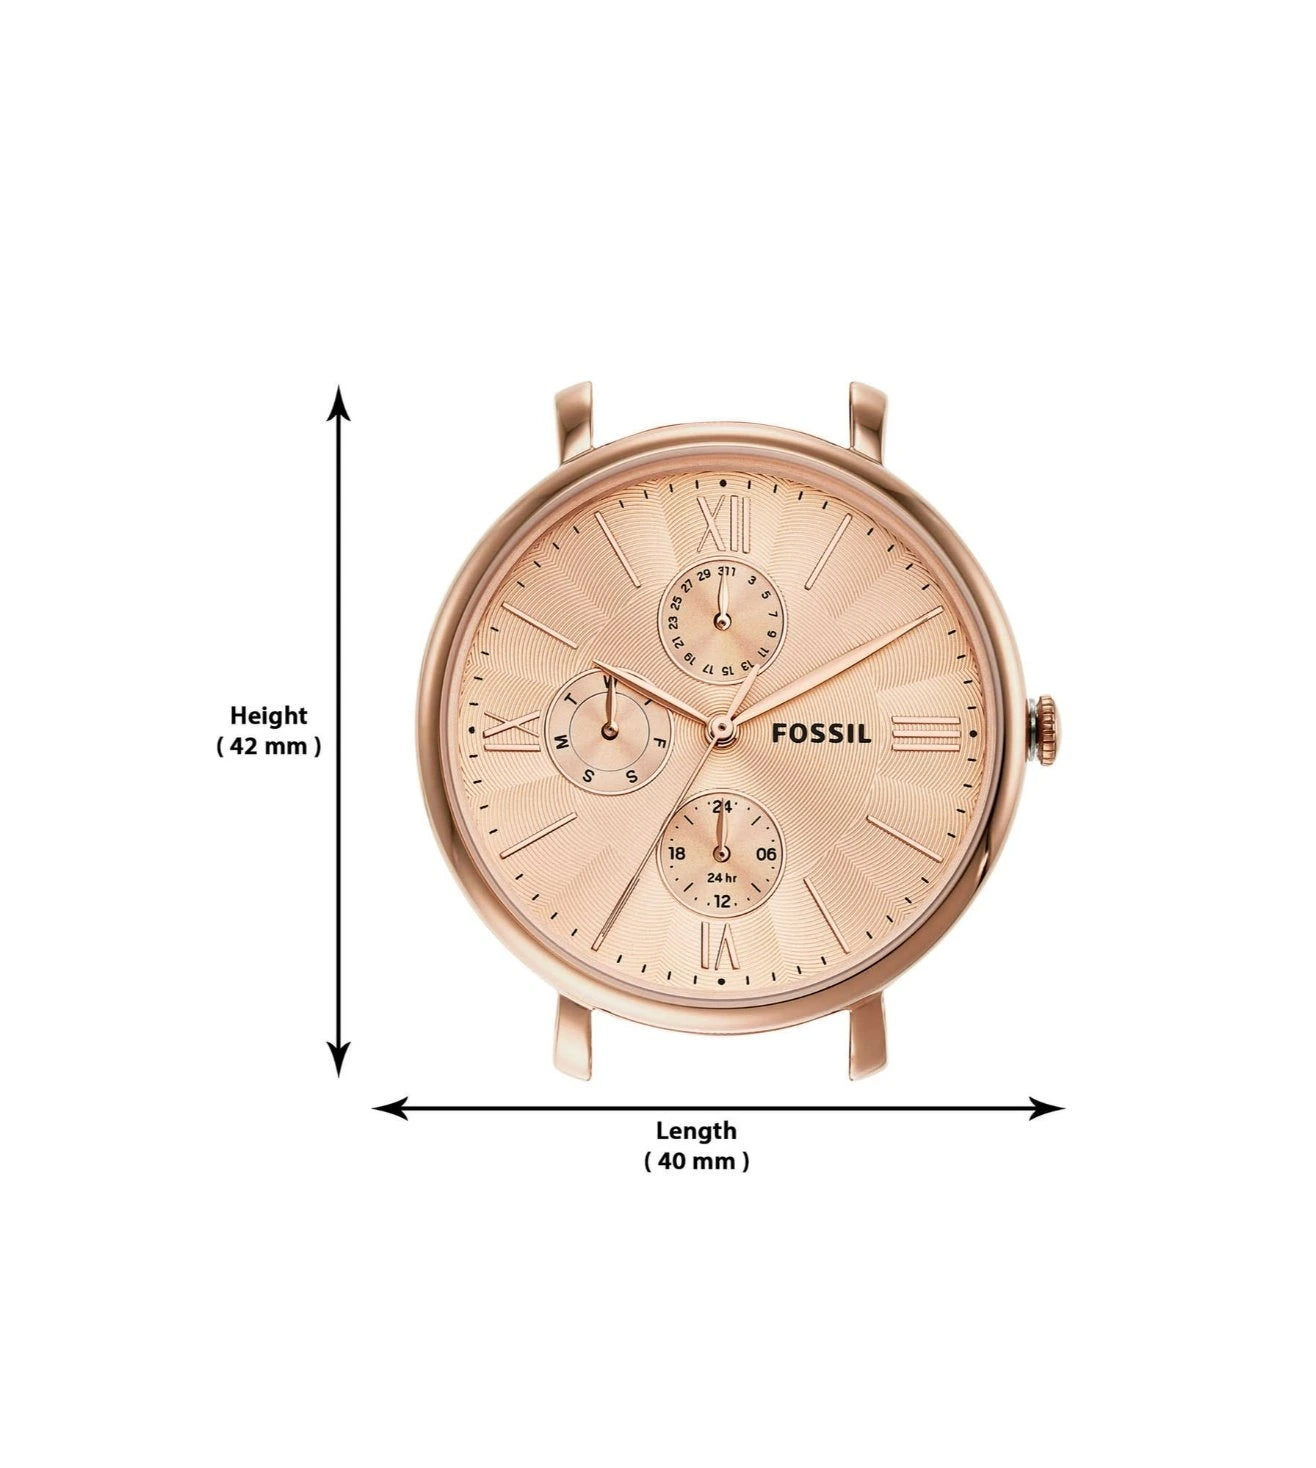 ES5098 | FOSSIL  Jacqueline Multifunction Analog Watch for Women